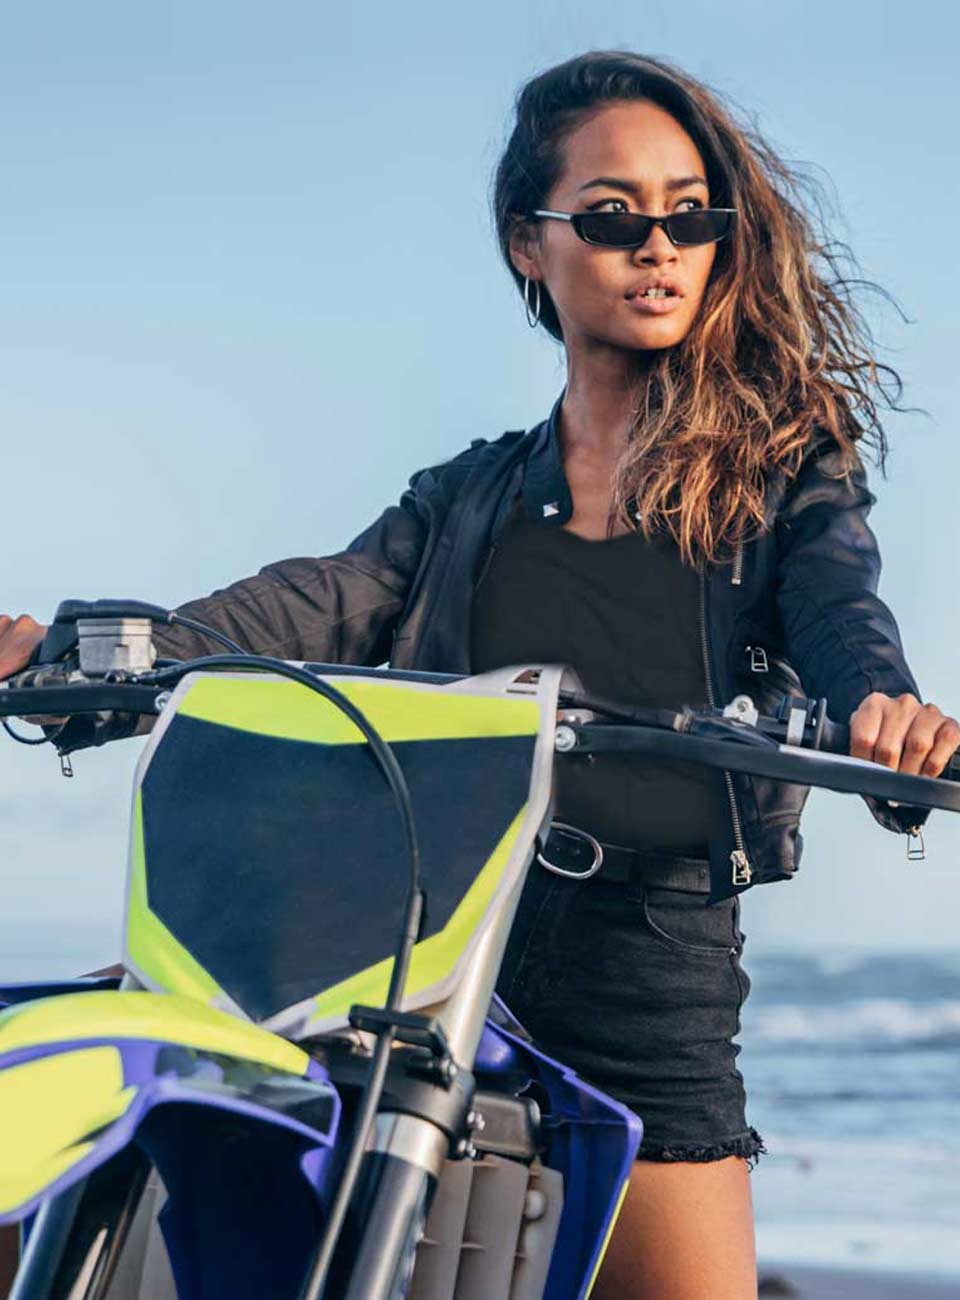 woman on a motorbike at the beach